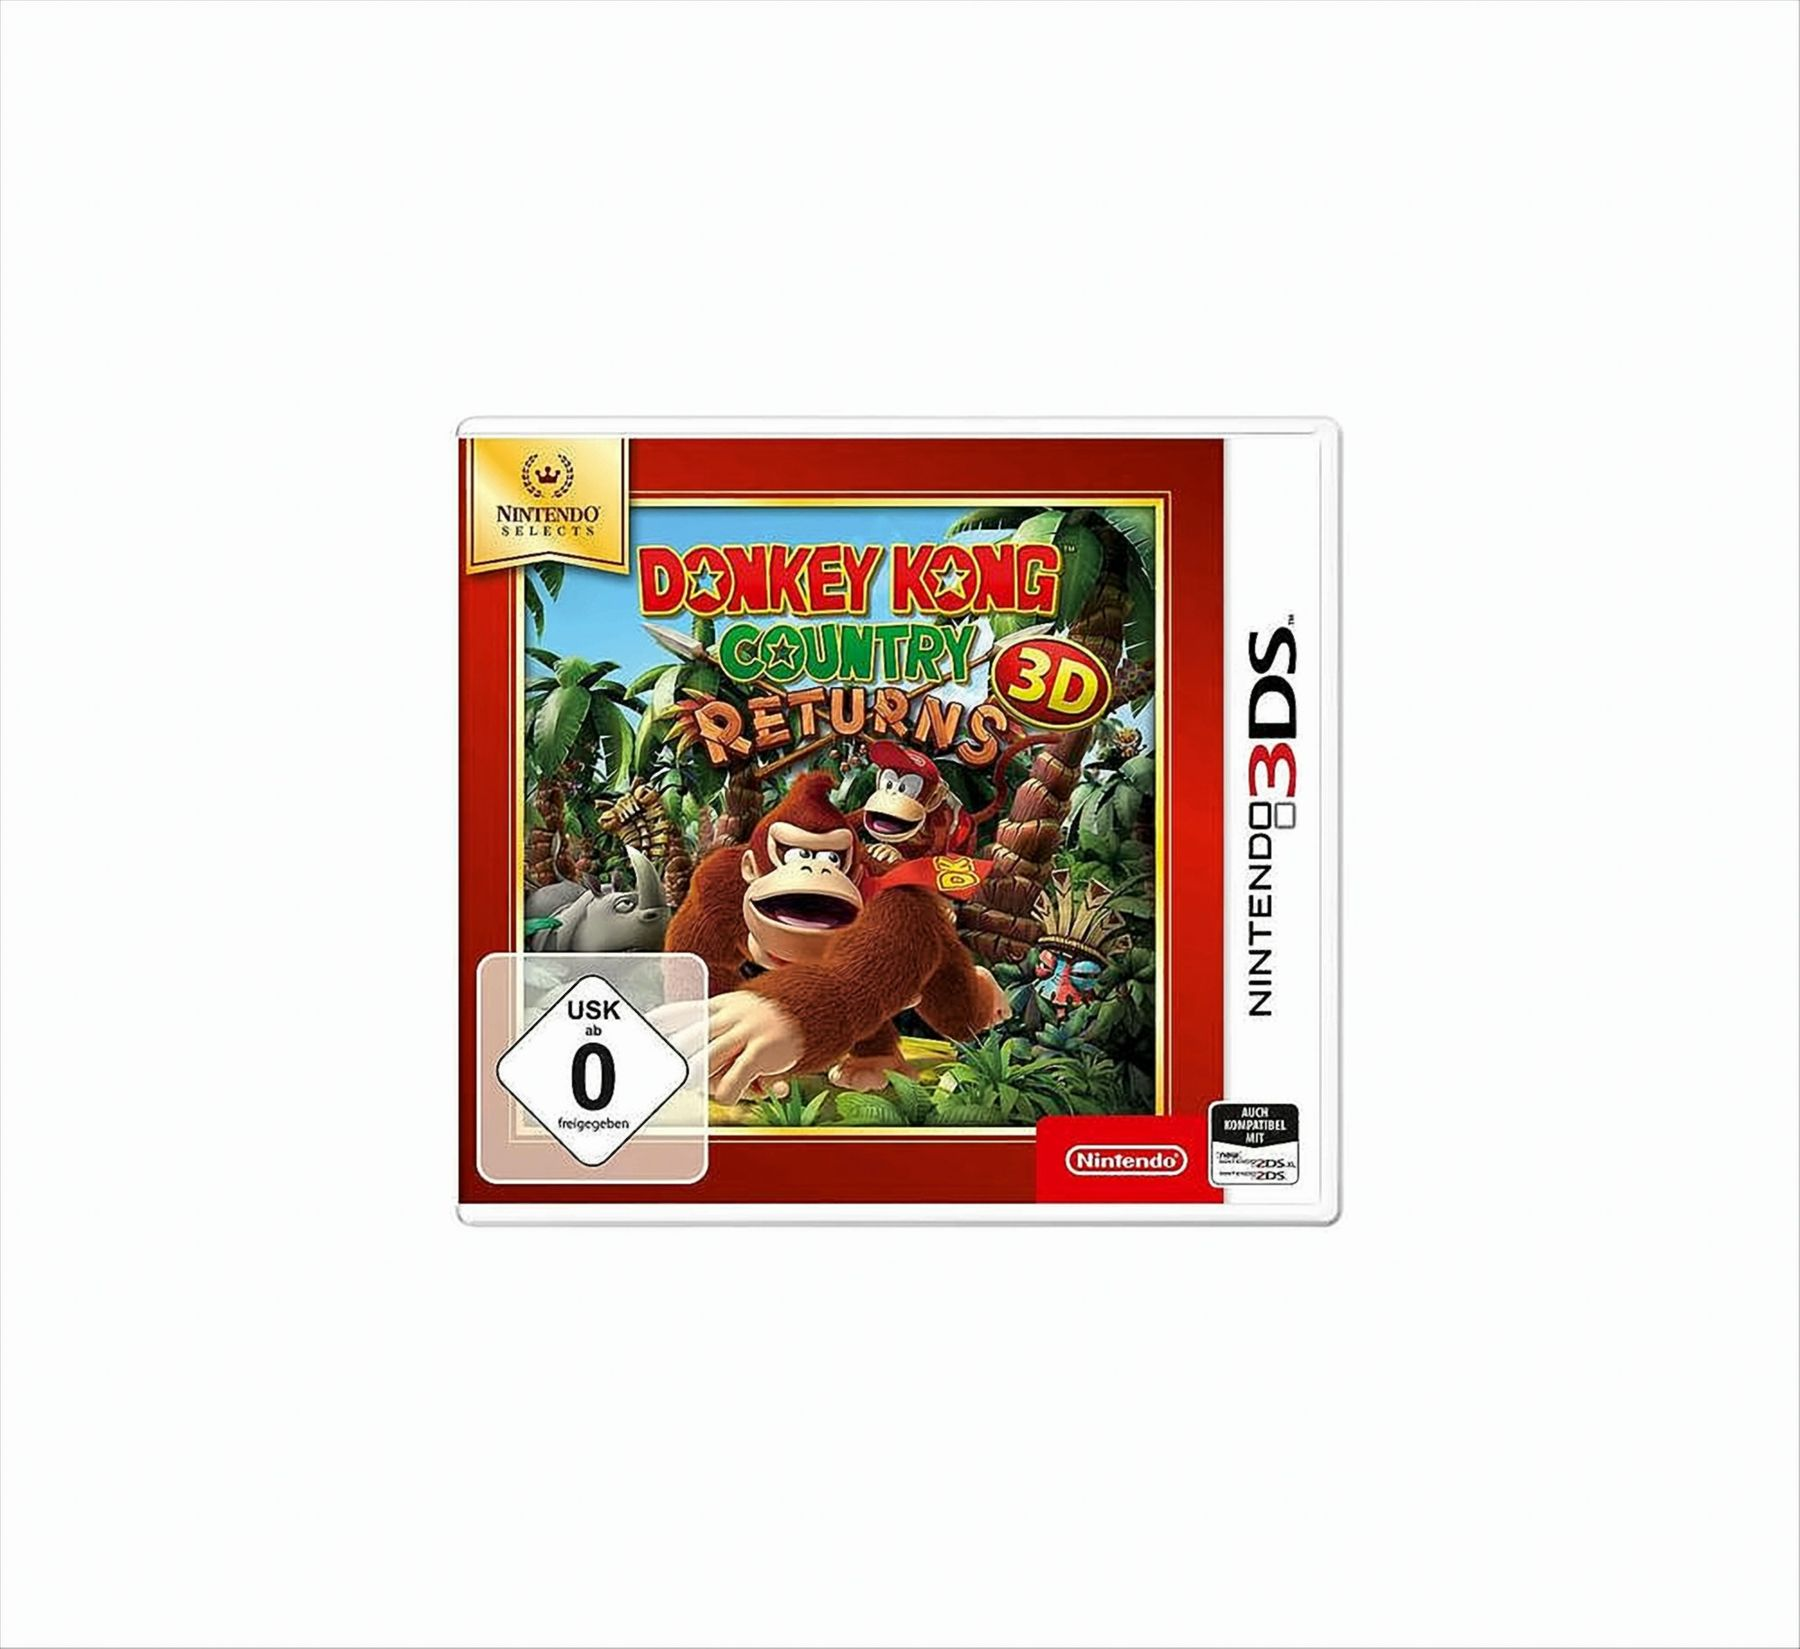 Donkey Kong TS - Returns 3DS] [Nintendo SELEC Country 3D 3DS